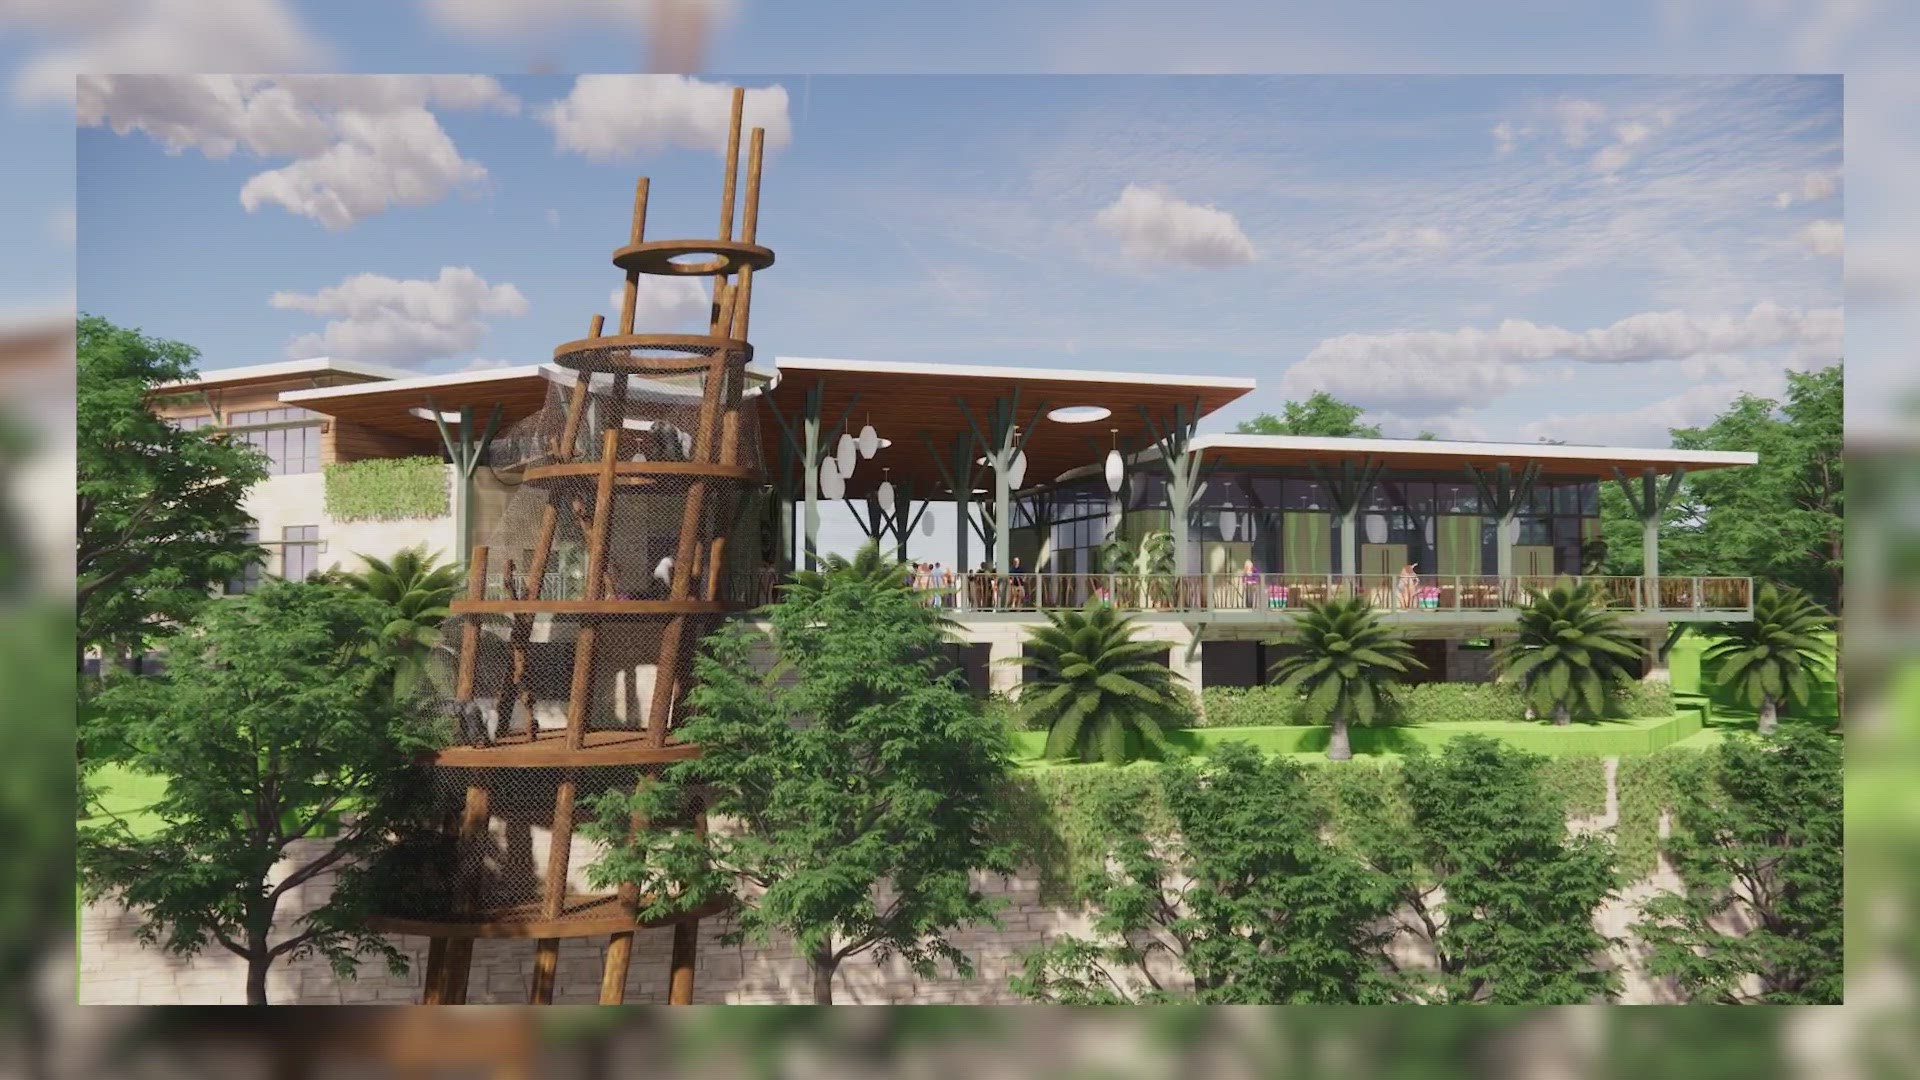 After investing over $80 million into the zoo over the last eight years, the complete picture of phase 1 of the zoo's master plan is now clear.